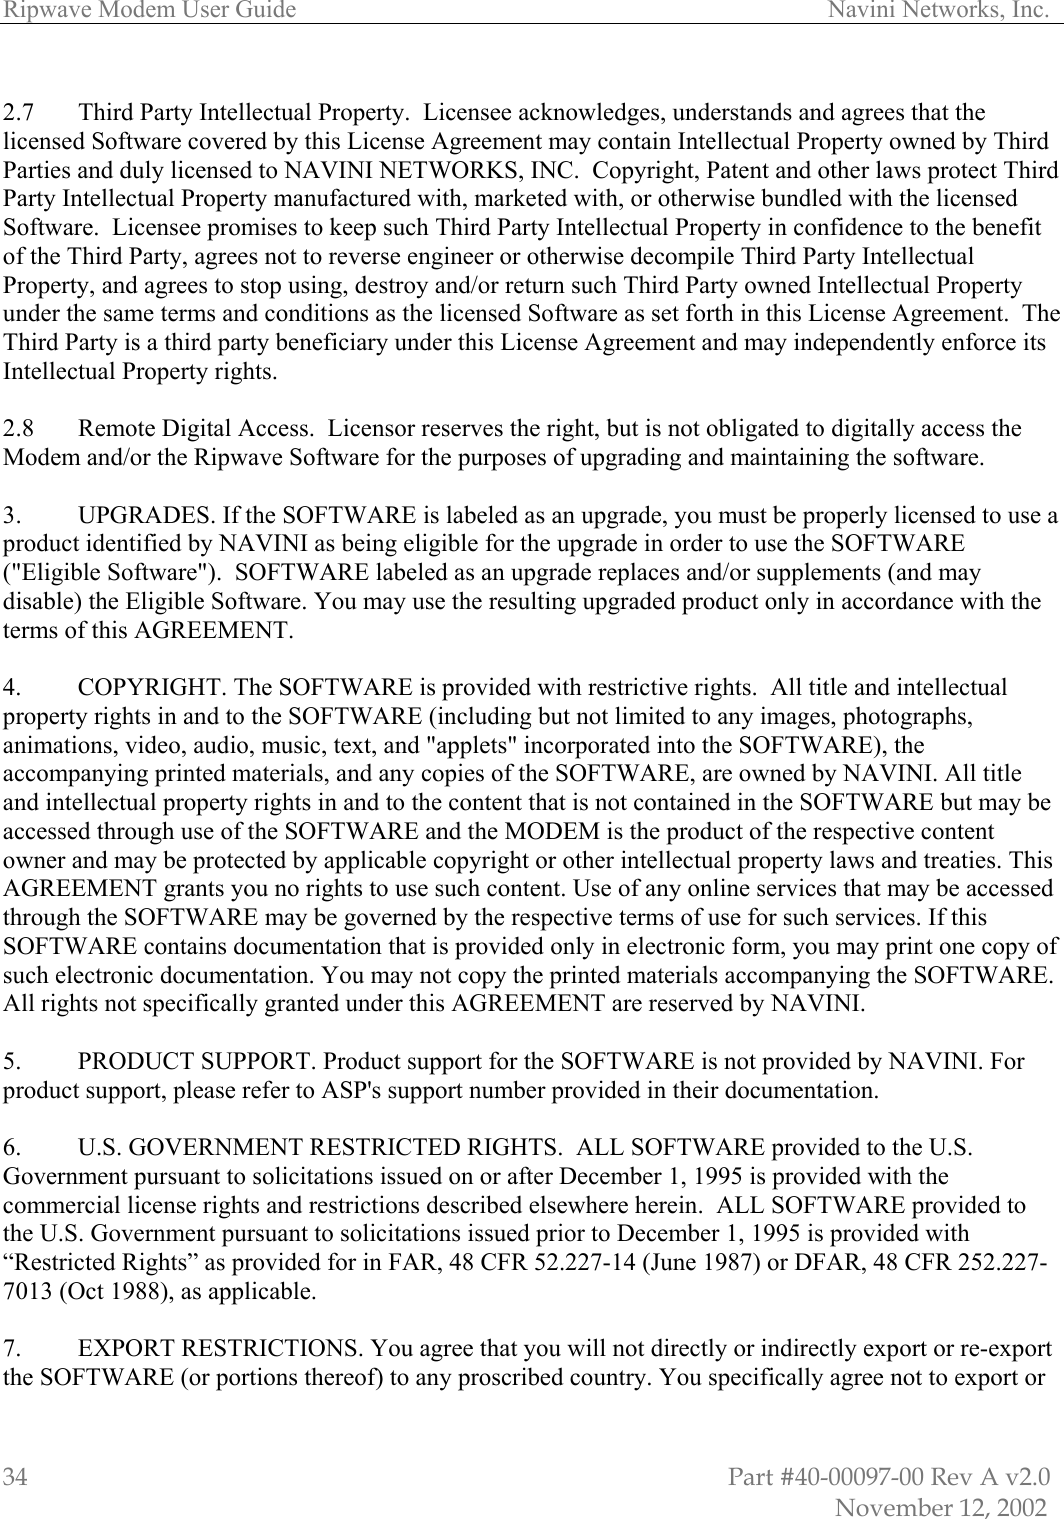 Ripwave Modem User Guide                                                                                     Navini Networks, Inc.                                                                                                               Part #40-00097-00 Rev A v2.0            November 12, 2002 34 2.7  Third Party Intellectual Property.  Licensee acknowledges, understands and agrees that the licensed Software covered by this License Agreement may contain Intellectual Property owned by Third Parties and duly licensed to NAVINI NETWORKS, INC.  Copyright, Patent and other laws protect Third Party Intellectual Property manufactured with, marketed with, or otherwise bundled with the licensed Software.  Licensee promises to keep such Third Party Intellectual Property in confidence to the benefit of the Third Party, agrees not to reverse engineer or otherwise decompile Third Party Intellectual Property, and agrees to stop using, destroy and/or return such Third Party owned Intellectual Property under the same terms and conditions as the licensed Software as set forth in this License Agreement.  The Third Party is a third party beneficiary under this License Agreement and may independently enforce its Intellectual Property rights.  2.8  Remote Digital Access.  Licensor reserves the right, but is not obligated to digitally access the Modem and/or the Ripwave Software for the purposes of upgrading and maintaining the software.  3.  UPGRADES. If the SOFTWARE is labeled as an upgrade, you must be properly licensed to use a product identified by NAVINI as being eligible for the upgrade in order to use the SOFTWARE (&quot;Eligible Software&quot;).  SOFTWARE labeled as an upgrade replaces and/or supplements (and may disable) the Eligible Software. You may use the resulting upgraded product only in accordance with the terms of this AGREEMENT.   4.  COPYRIGHT. The SOFTWARE is provided with restrictive rights.  All title and intellectual property rights in and to the SOFTWARE (including but not limited to any images, photographs, animations, video, audio, music, text, and &quot;applets&quot; incorporated into the SOFTWARE), the accompanying printed materials, and any copies of the SOFTWARE, are owned by NAVINI. All title and intellectual property rights in and to the content that is not contained in the SOFTWARE but may be accessed through use of the SOFTWARE and the MODEM is the product of the respective content owner and may be protected by applicable copyright or other intellectual property laws and treaties. This AGREEMENT grants you no rights to use such content. Use of any online services that may be accessed through the SOFTWARE may be governed by the respective terms of use for such services. If this SOFTWARE contains documentation that is provided only in electronic form, you may print one copy of such electronic documentation. You may not copy the printed materials accompanying the SOFTWARE. All rights not specifically granted under this AGREEMENT are reserved by NAVINI.  5.  PRODUCT SUPPORT. Product support for the SOFTWARE is not provided by NAVINI. For product support, please refer to ASP&apos;s support number provided in their documentation.  6.  U.S. GOVERNMENT RESTRICTED RIGHTS.  ALL SOFTWARE provided to the U.S. Government pursuant to solicitations issued on or after December 1, 1995 is provided with the commercial license rights and restrictions described elsewhere herein.  ALL SOFTWARE provided to the U.S. Government pursuant to solicitations issued prior to December 1, 1995 is provided with “Restricted Rights” as provided for in FAR, 48 CFR 52.227-14 (June 1987) or DFAR, 48 CFR 252.227-7013 (Oct 1988), as applicable.  7.  EXPORT RESTRICTIONS. You agree that you will not directly or indirectly export or re-export the SOFTWARE (or portions thereof) to any proscribed country. You specifically agree not to export or 